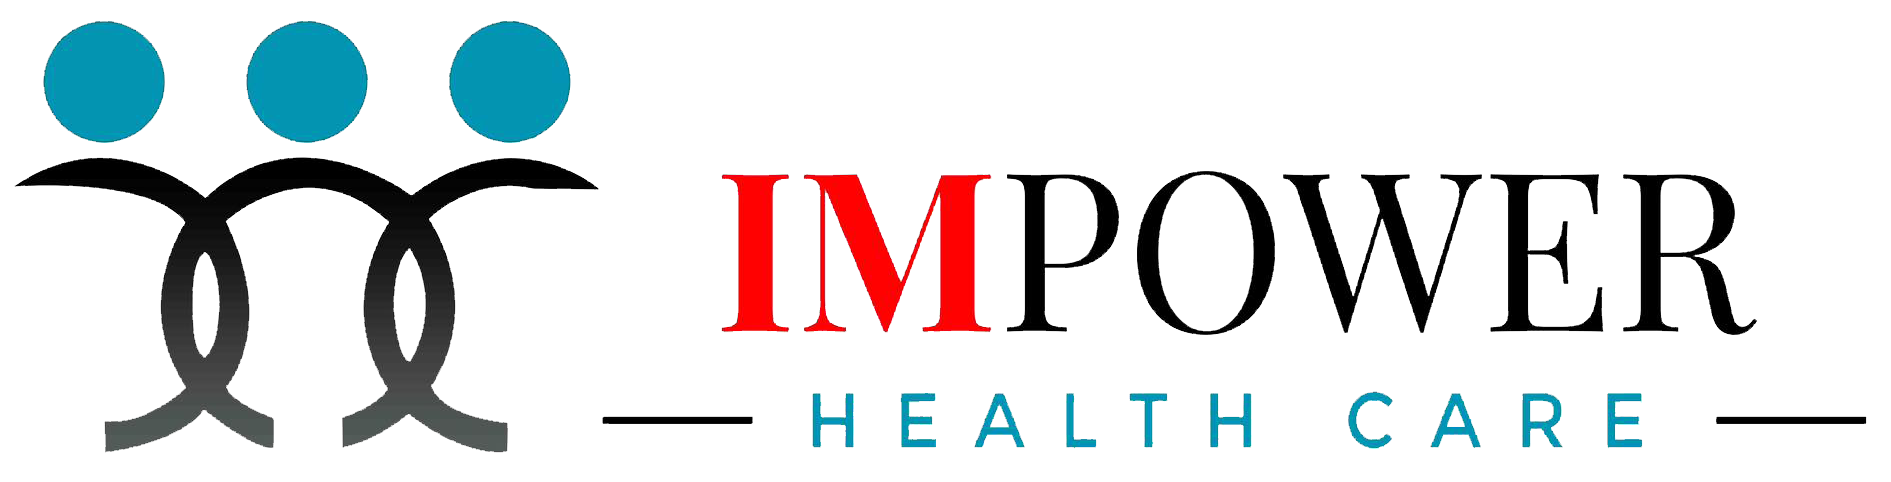 Quality Standards - Impower Health Care